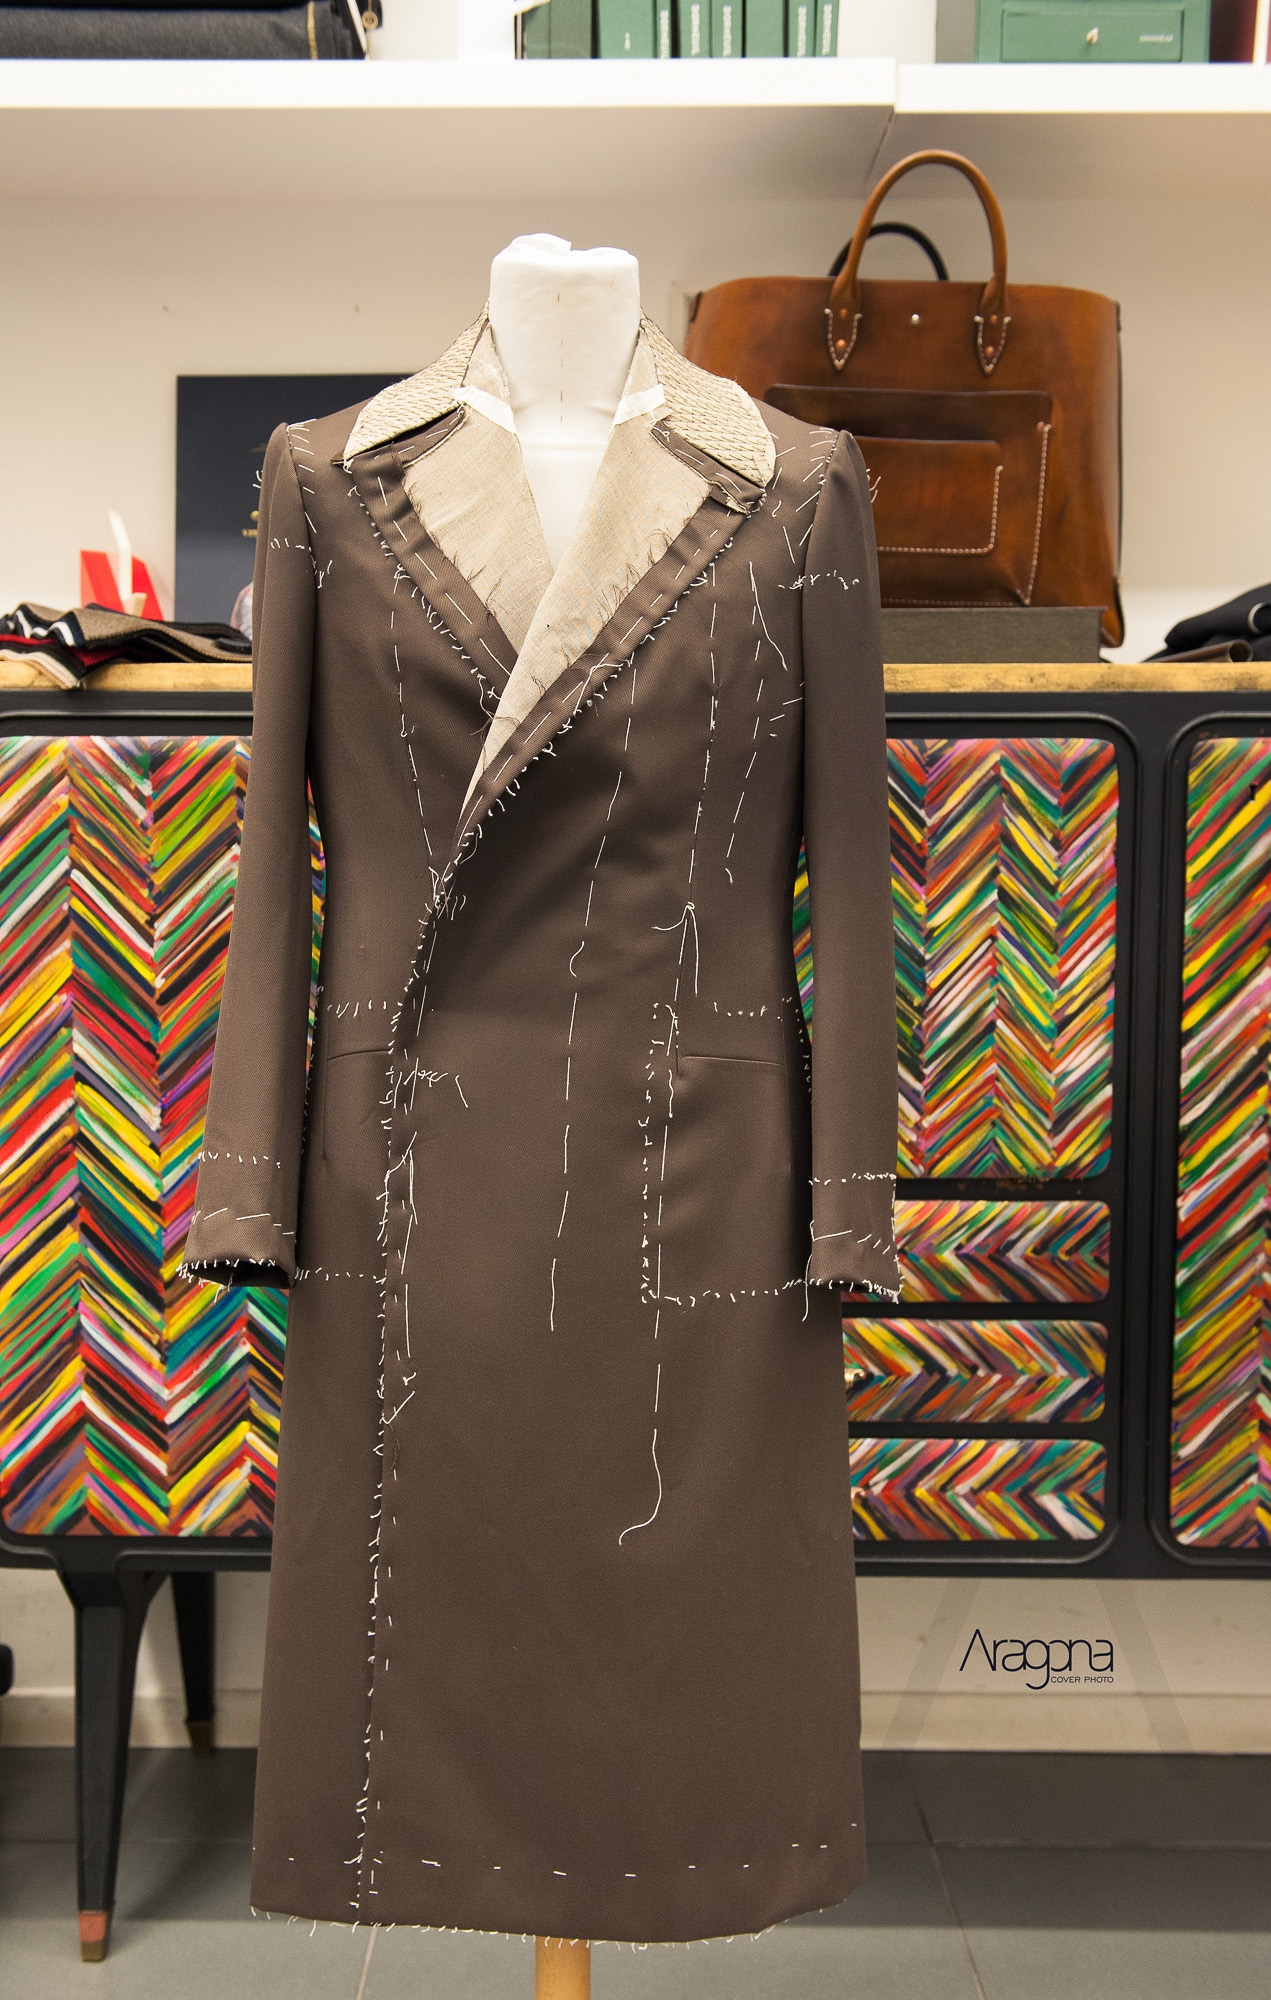 Dalcuore Ulster Coat - Part II First and Second Fitting